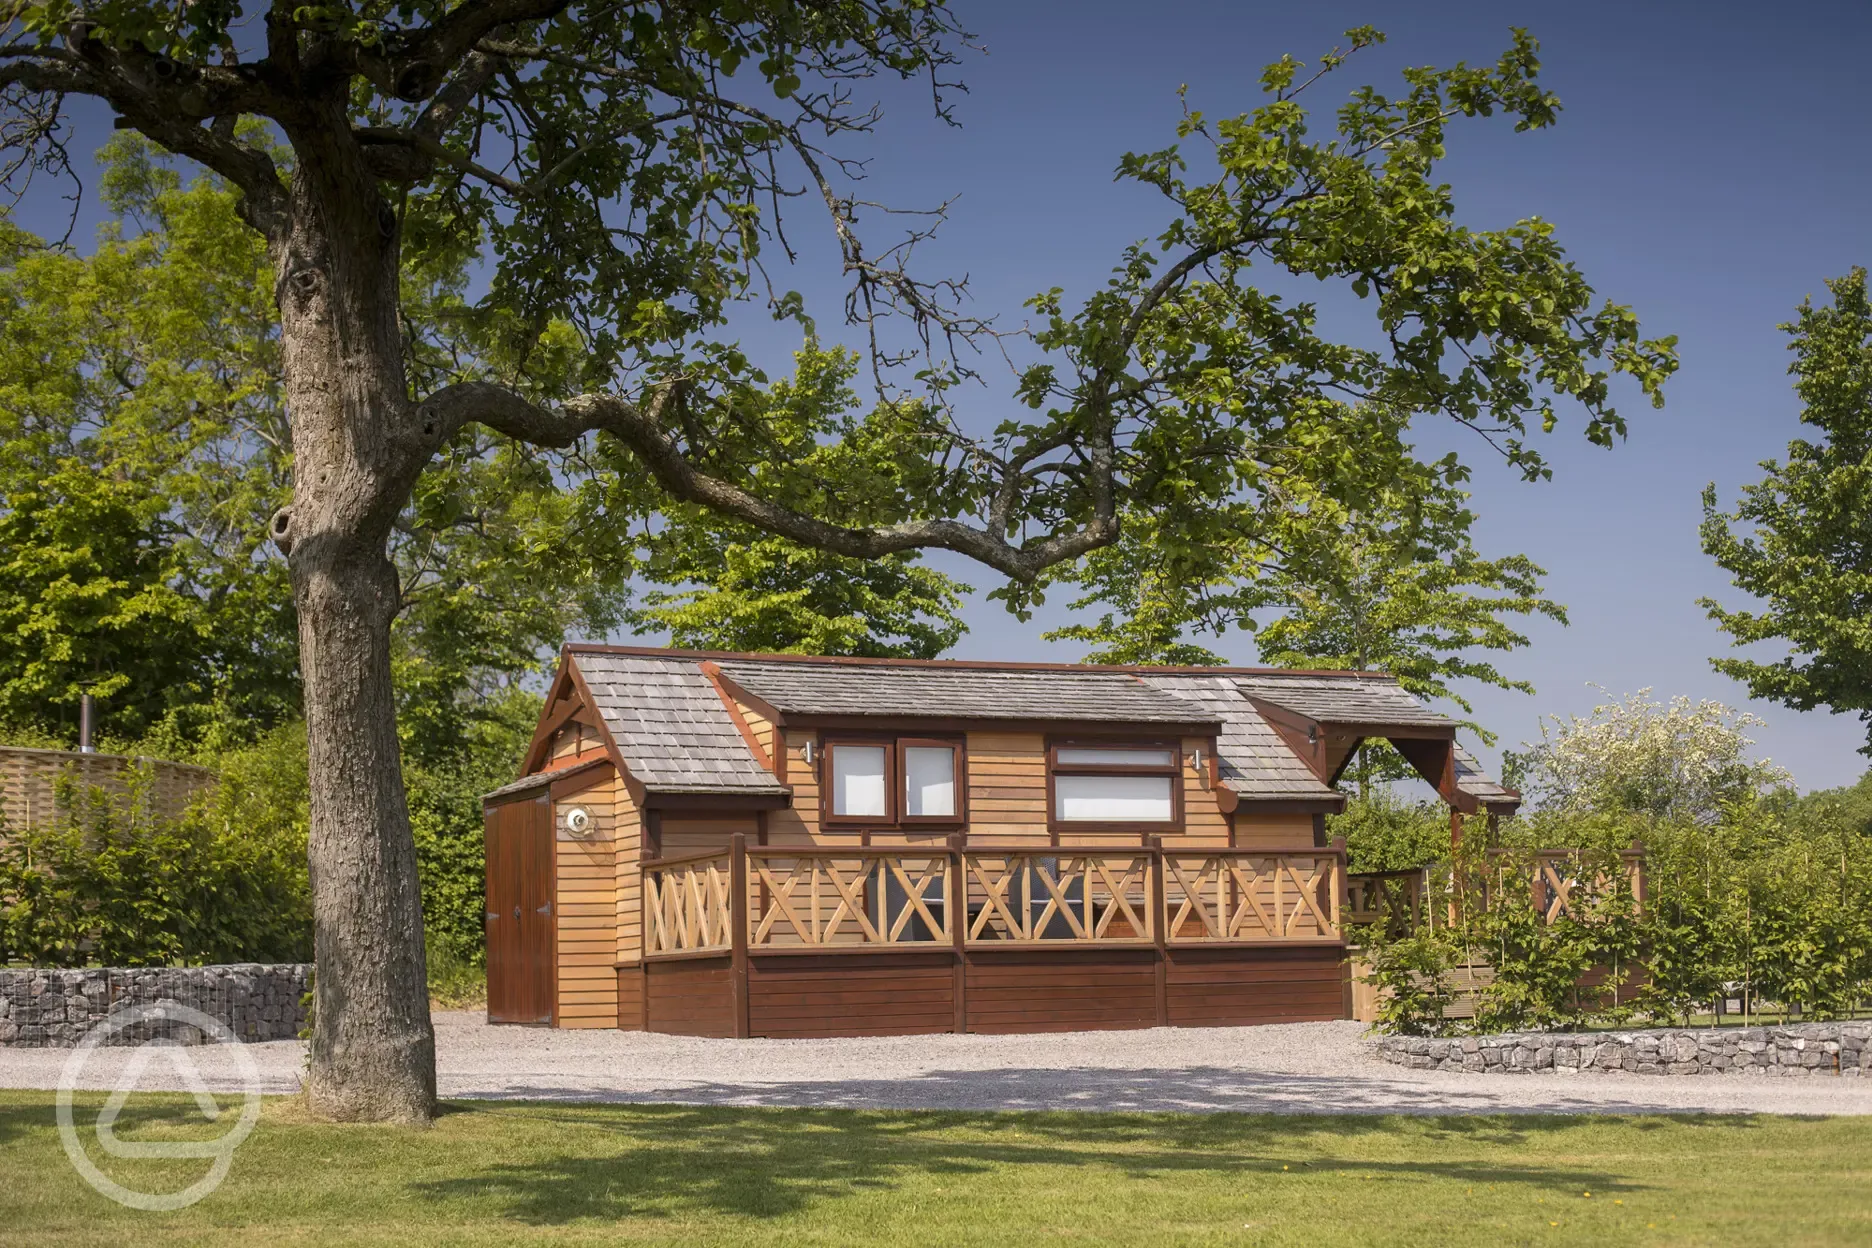 Mini Cedar Lodge with king size bed, kitchenette, decking